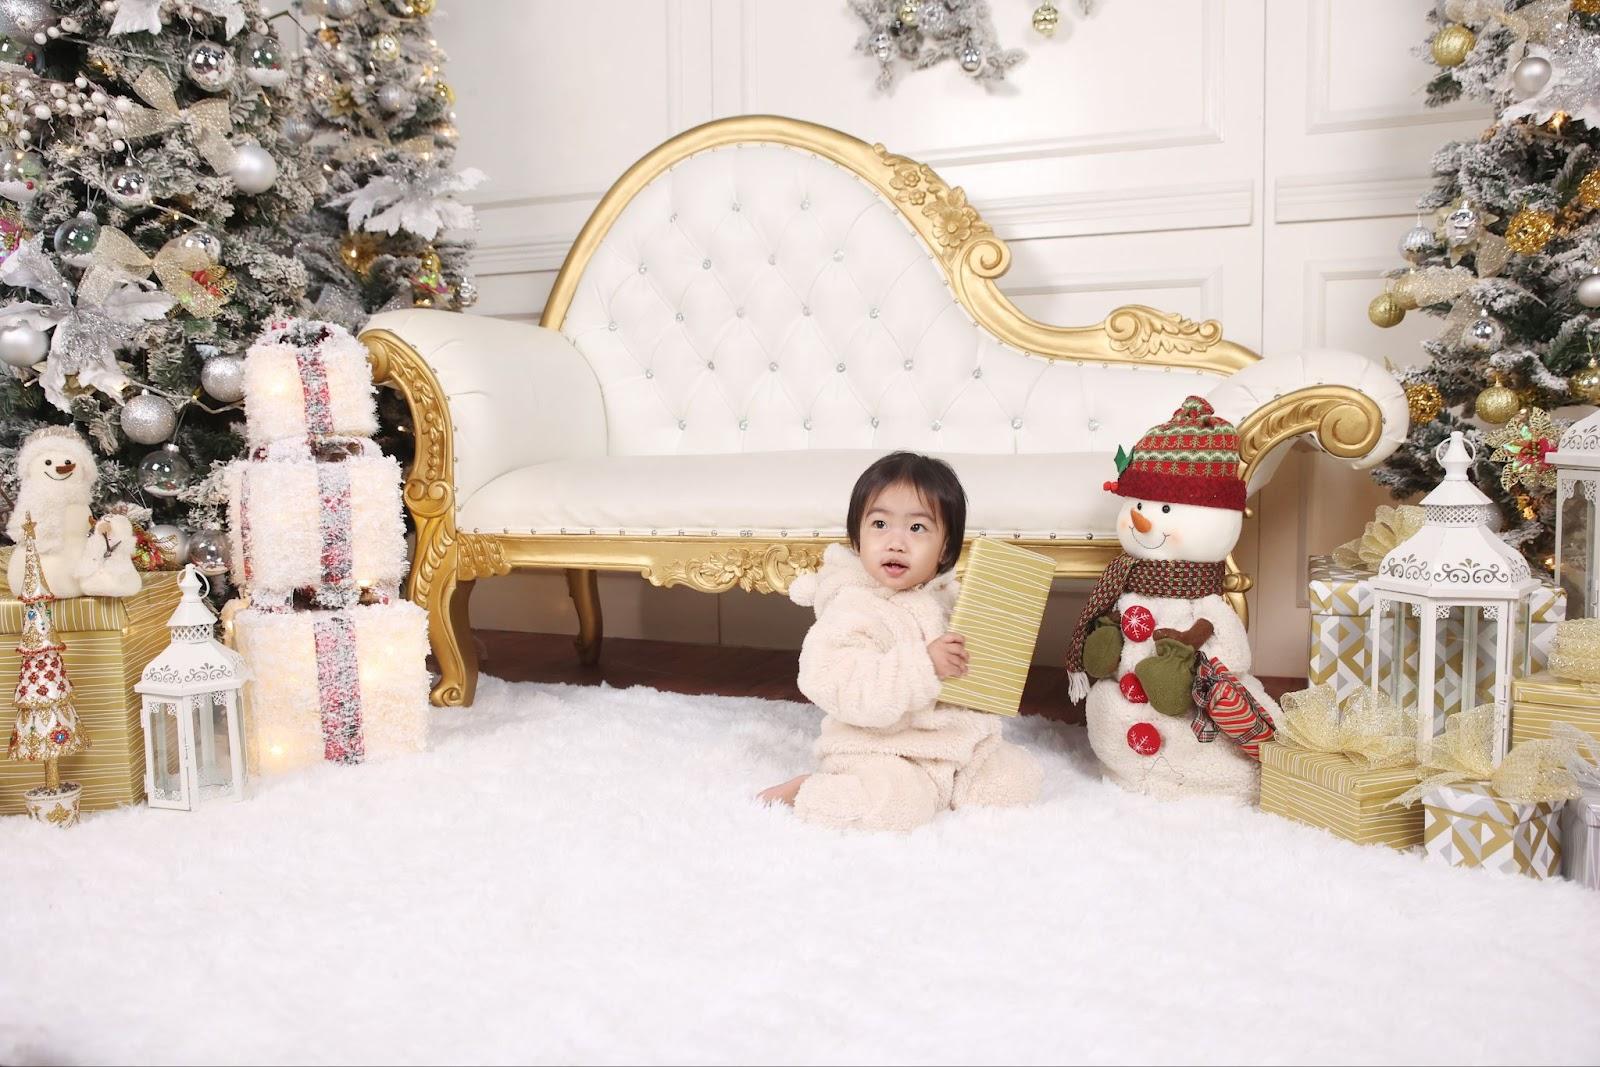 newborn christmas photo idea: baby wearing a bear jumpsuit playing with a present in a white christmas setup